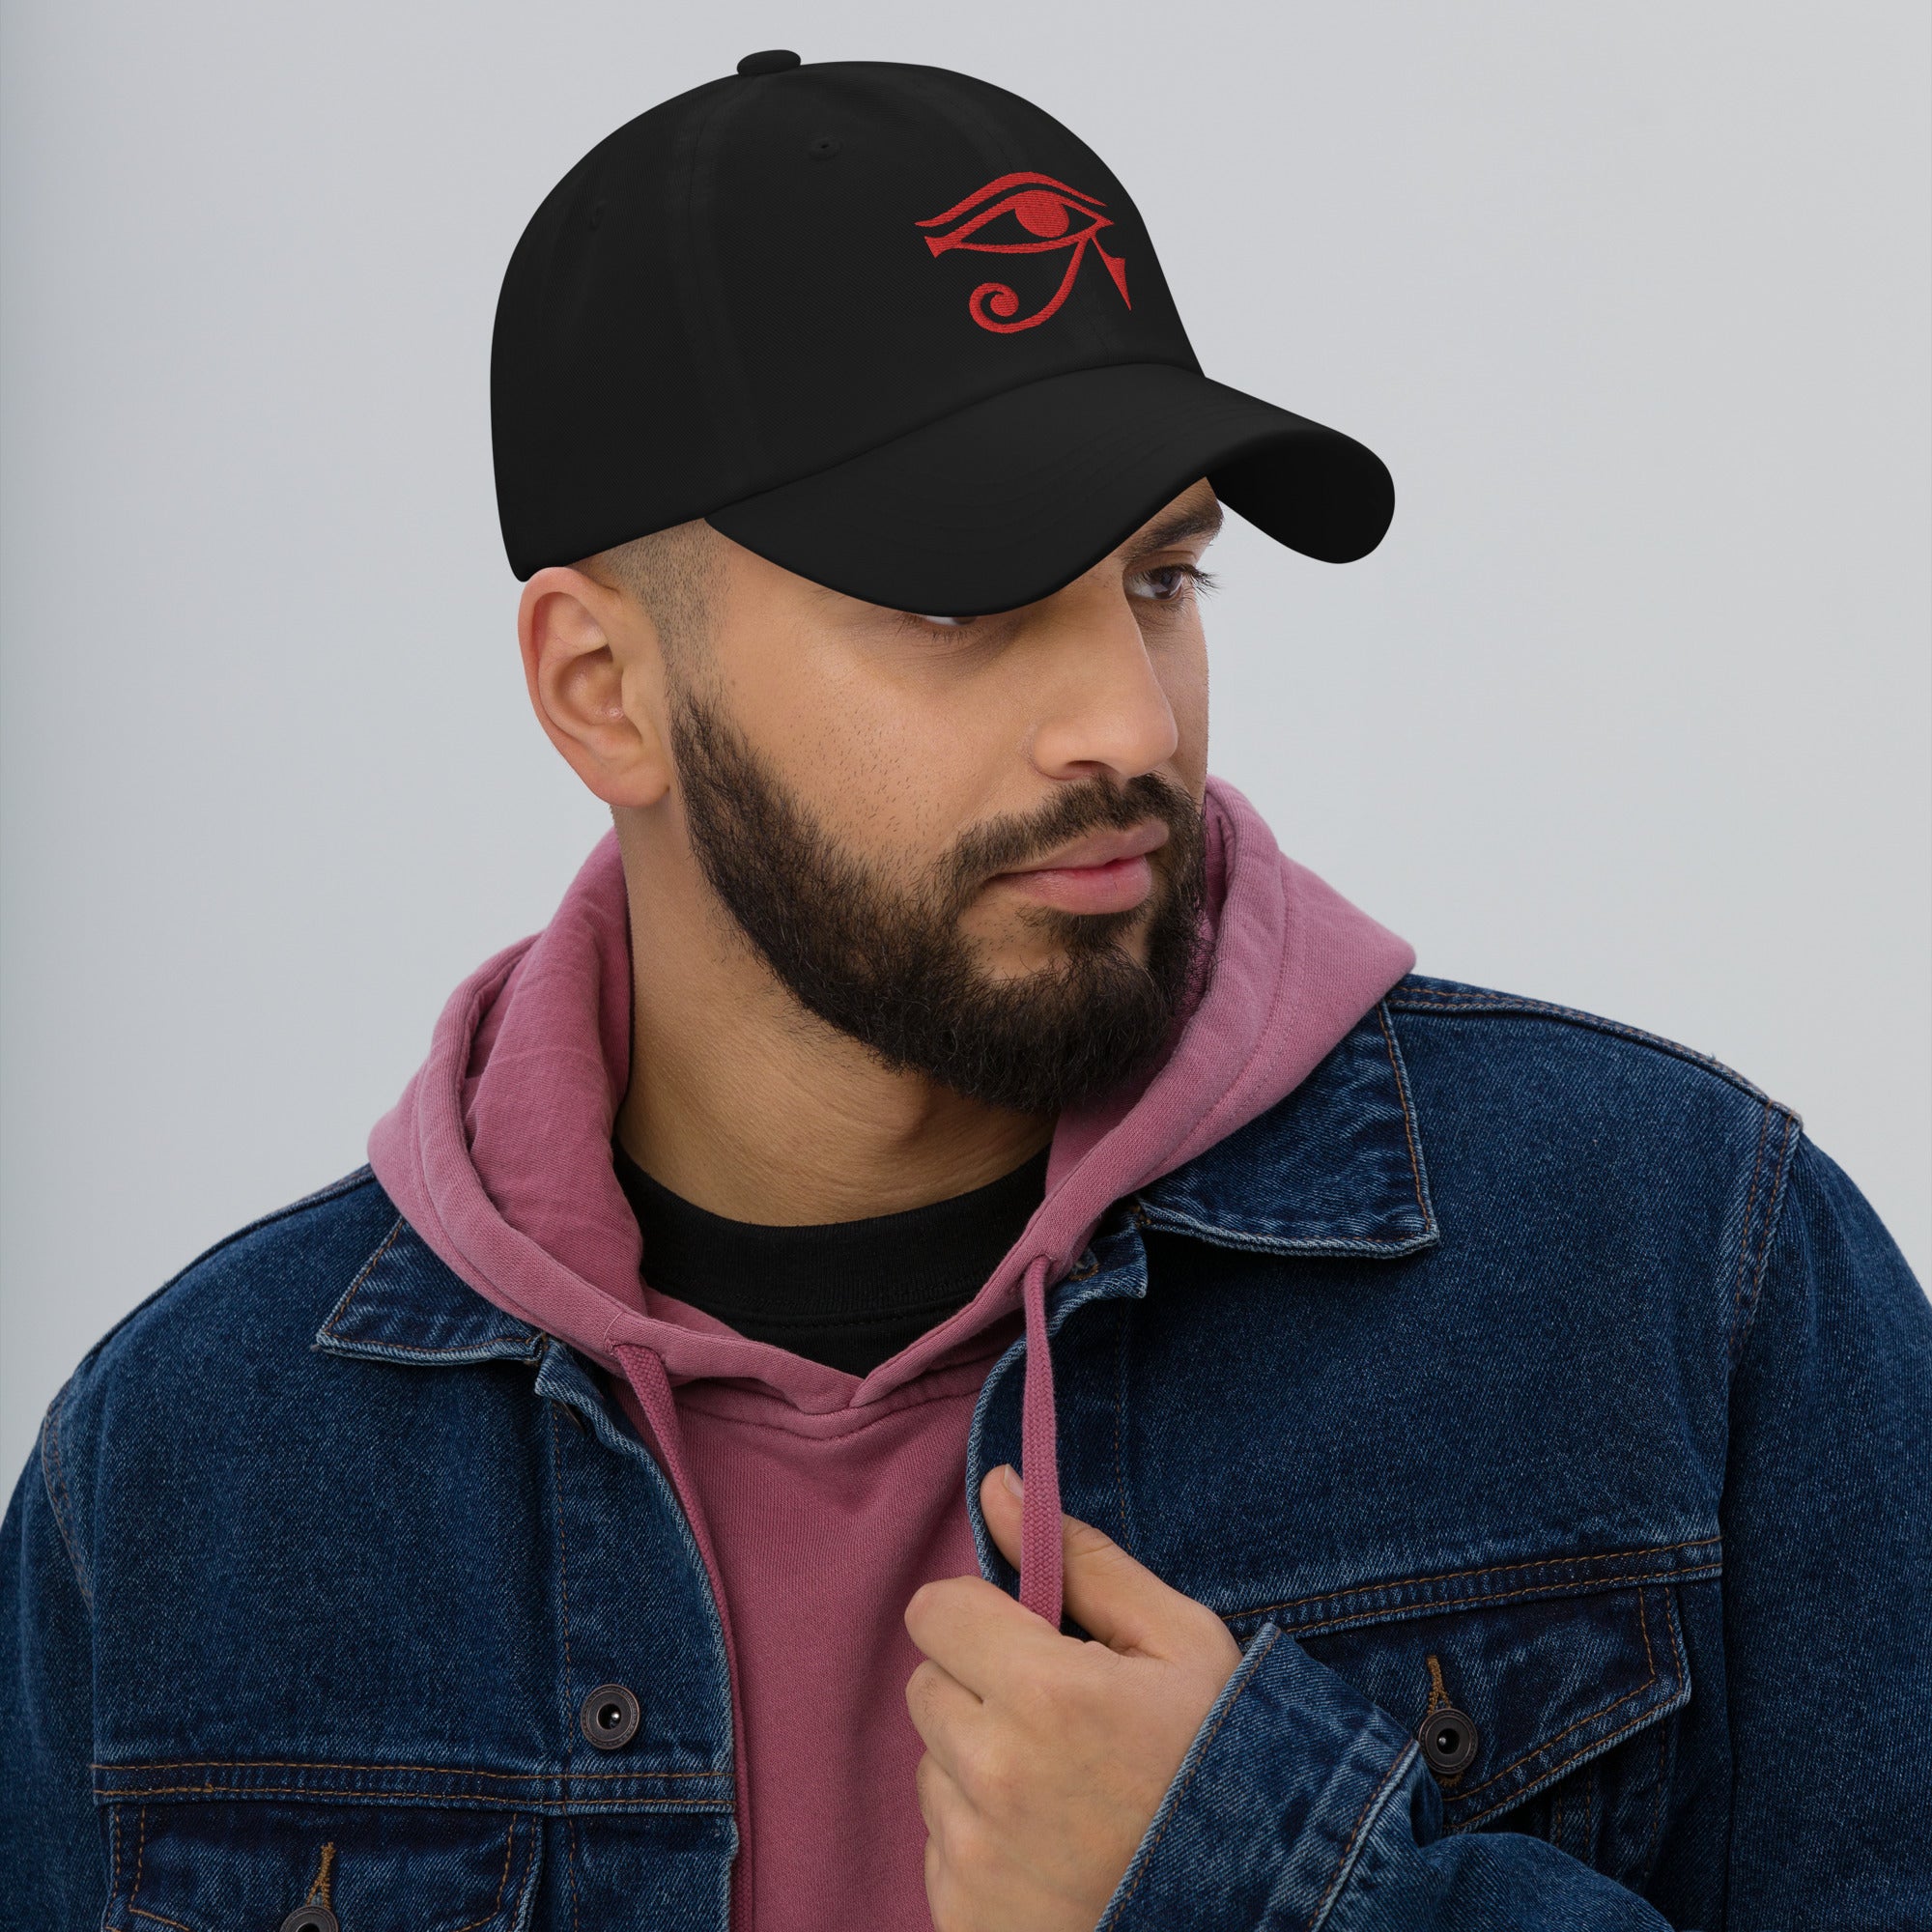 Eye of Ra Egyptian Goddess Embroidered Baseball Cap Red Thread Dad hat - Edge of Life Designs